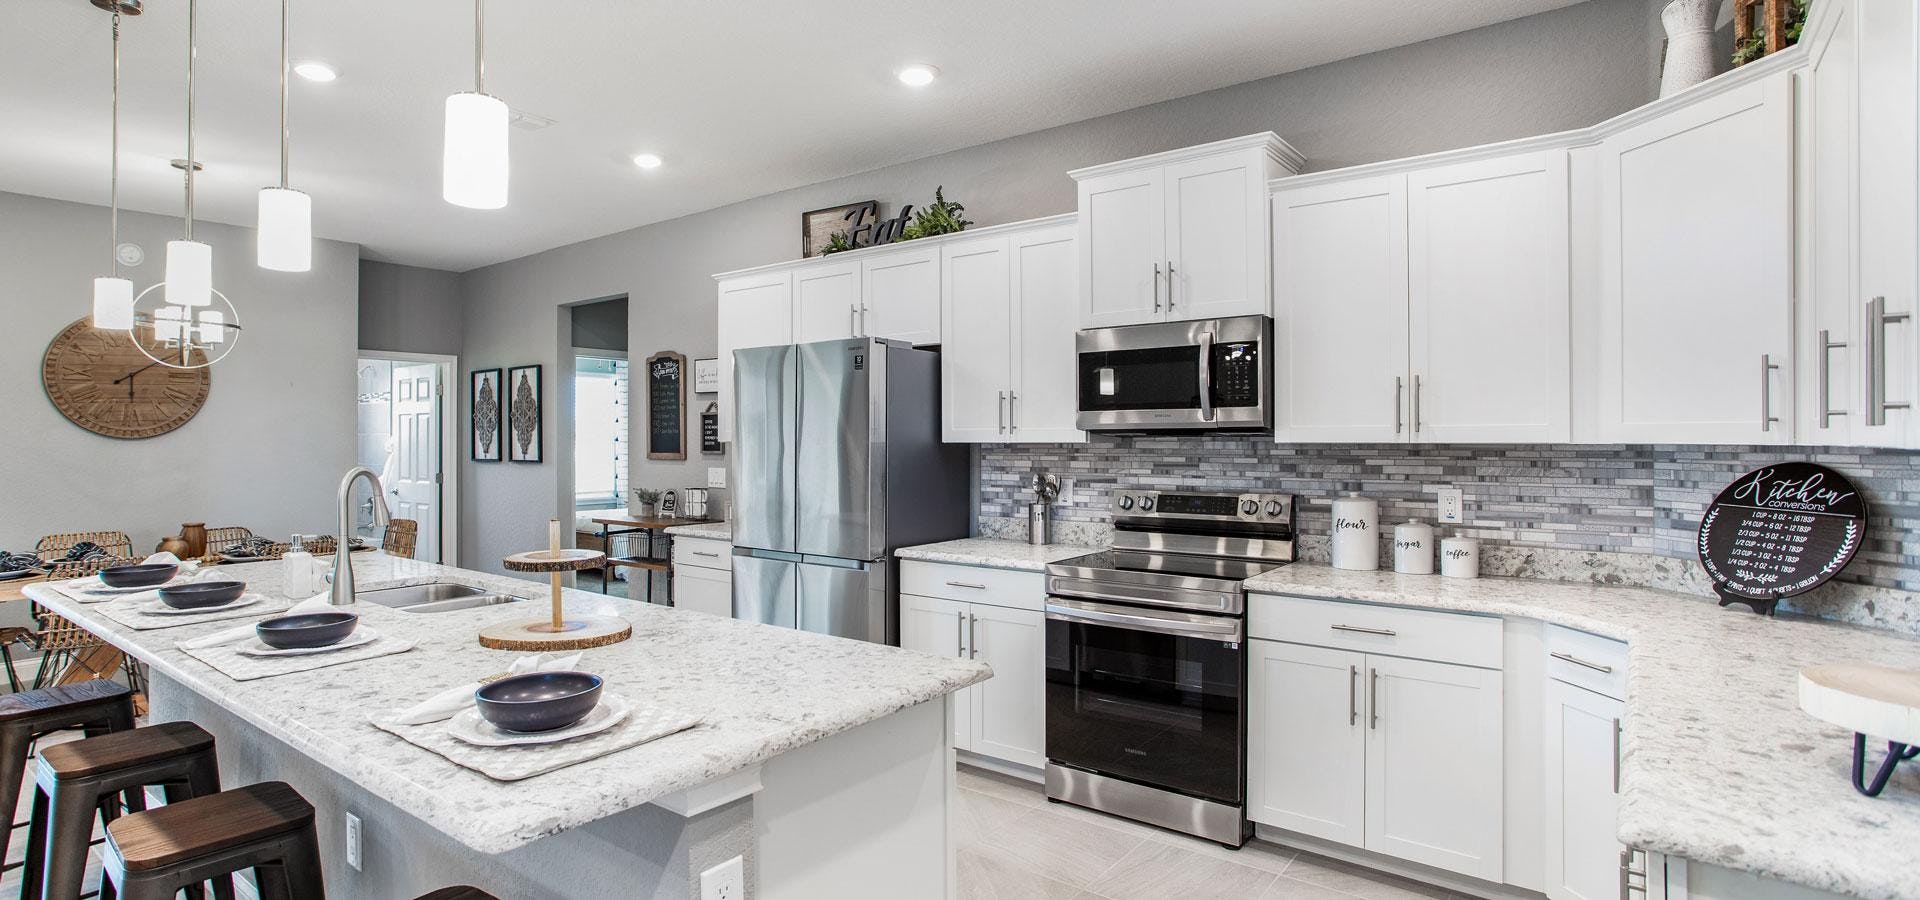 Kitchen design tops Florida new home must-haves